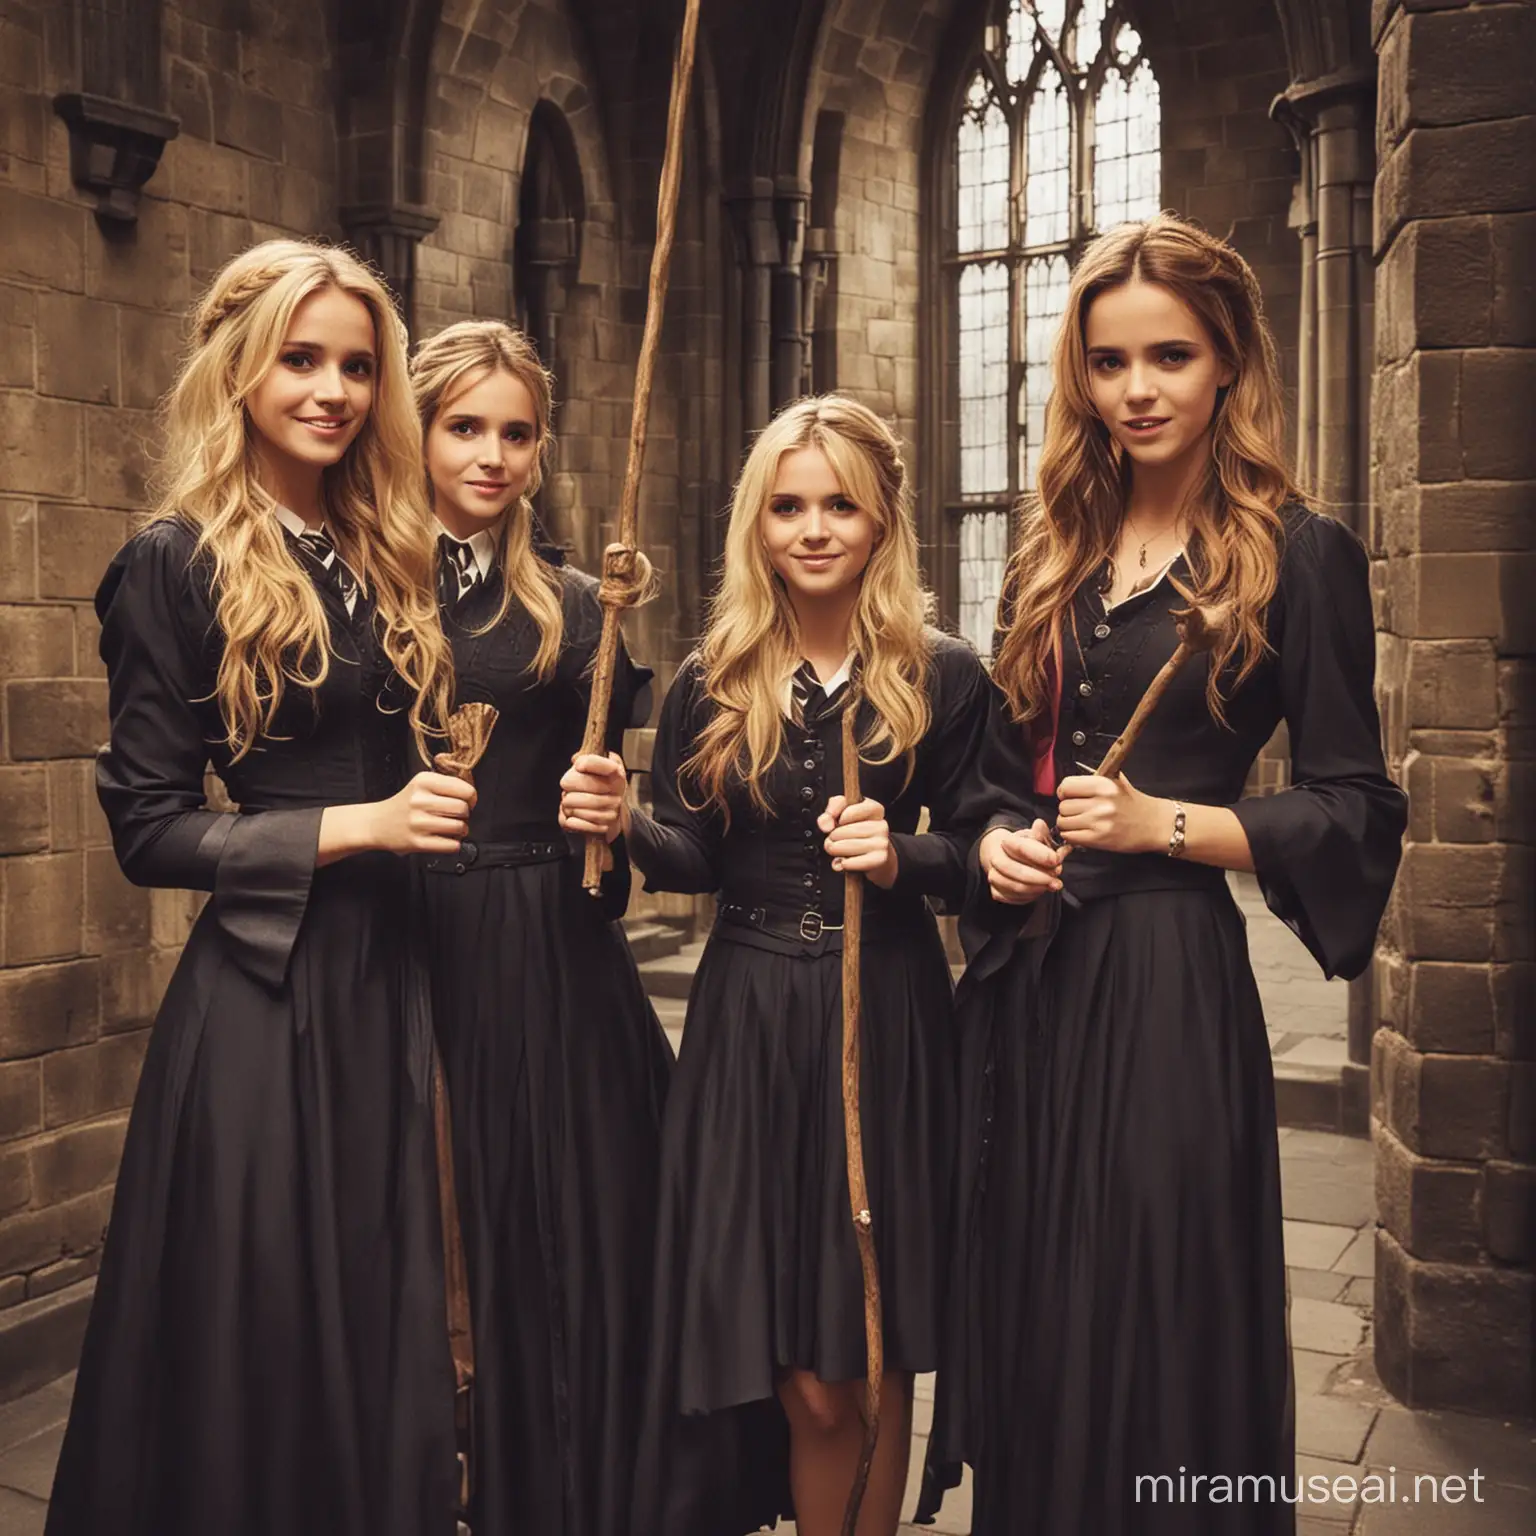 Luisana Lopilato with Wand in Harry Potter Castle featuring Emma Watson and Tom Felton